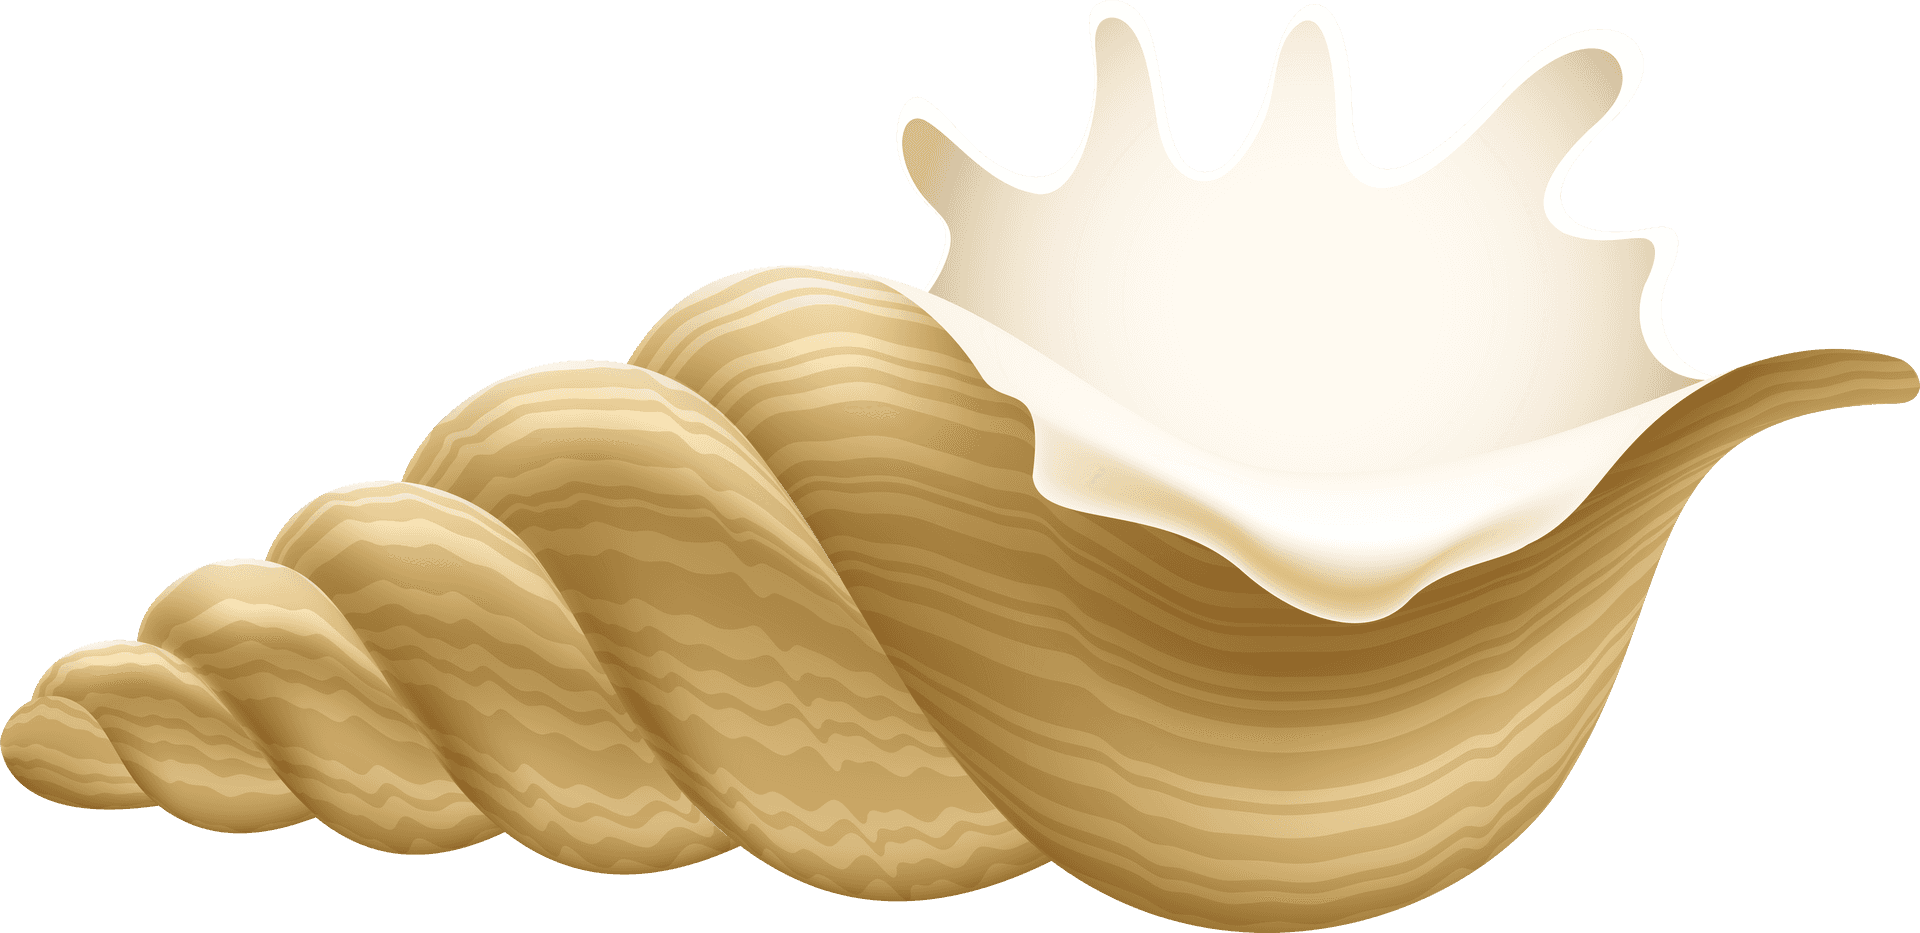 Golden Conch Shell Illustration PNG